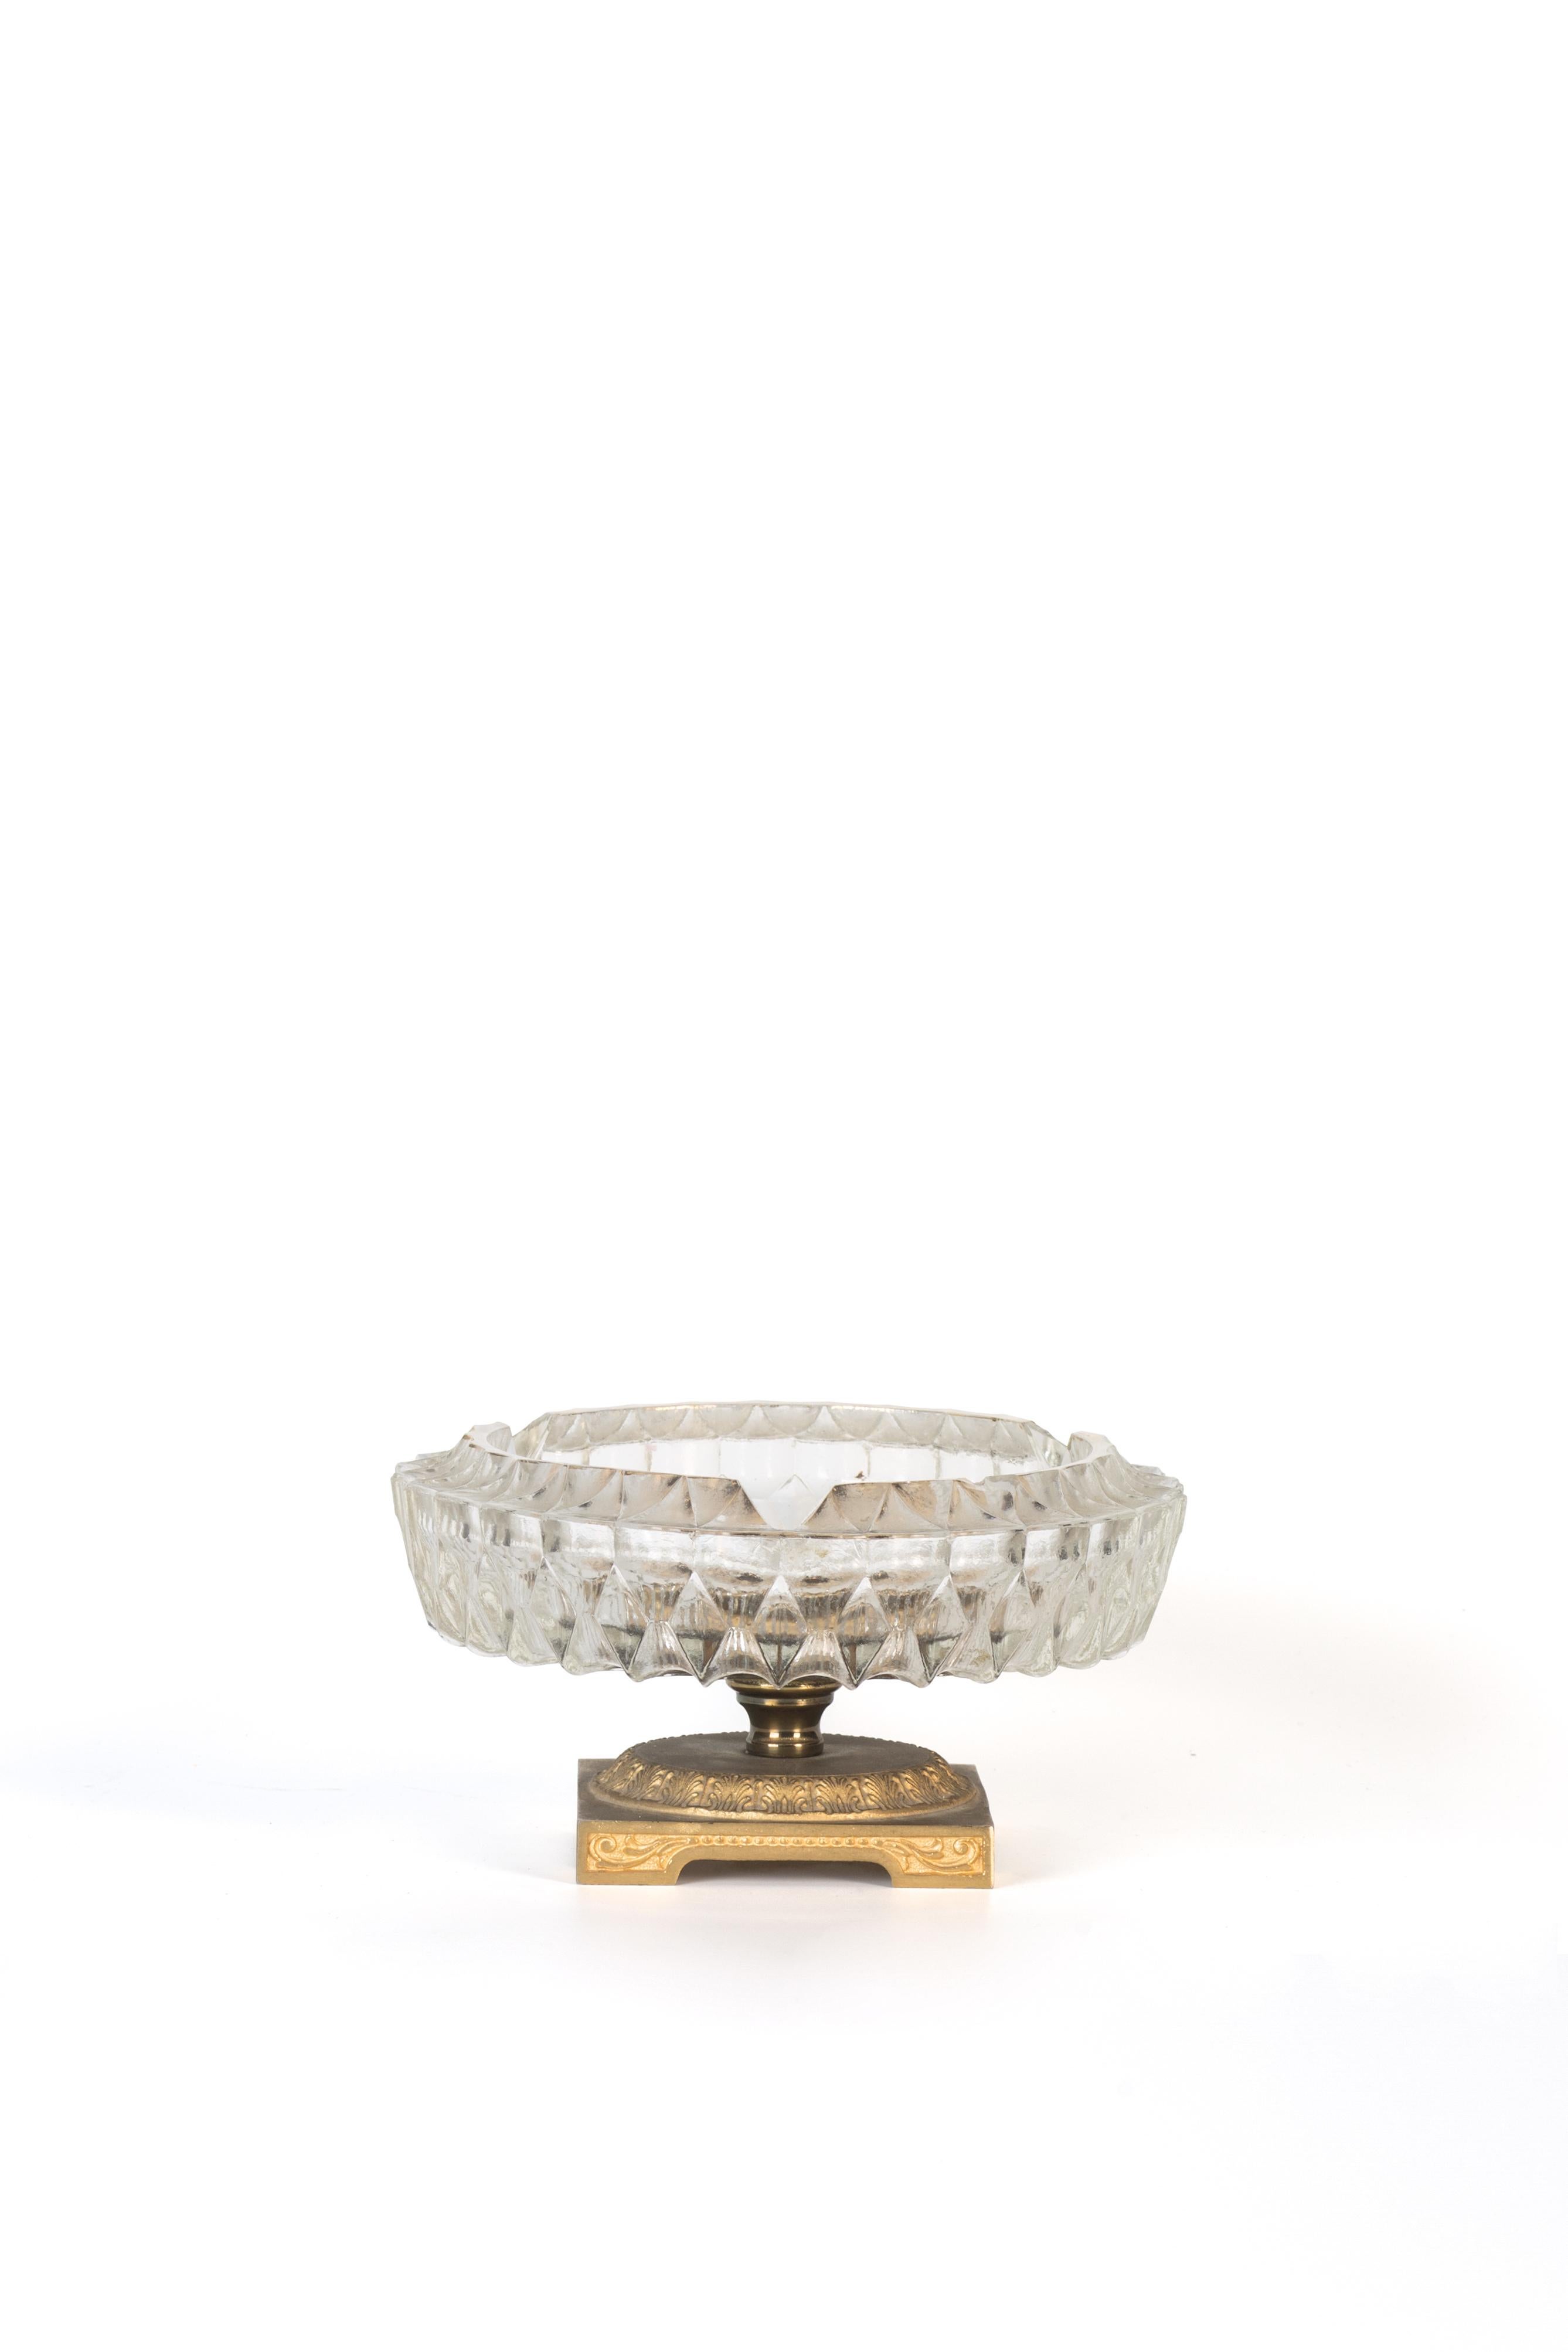 Vintage glass ashtray is an elegant glass decorative object, realized during the 1950s.

A very elegant glass ashtray with a precious gilded metal pedestal base.

On the bottom a refined decor with flowers add a touch of quality to this